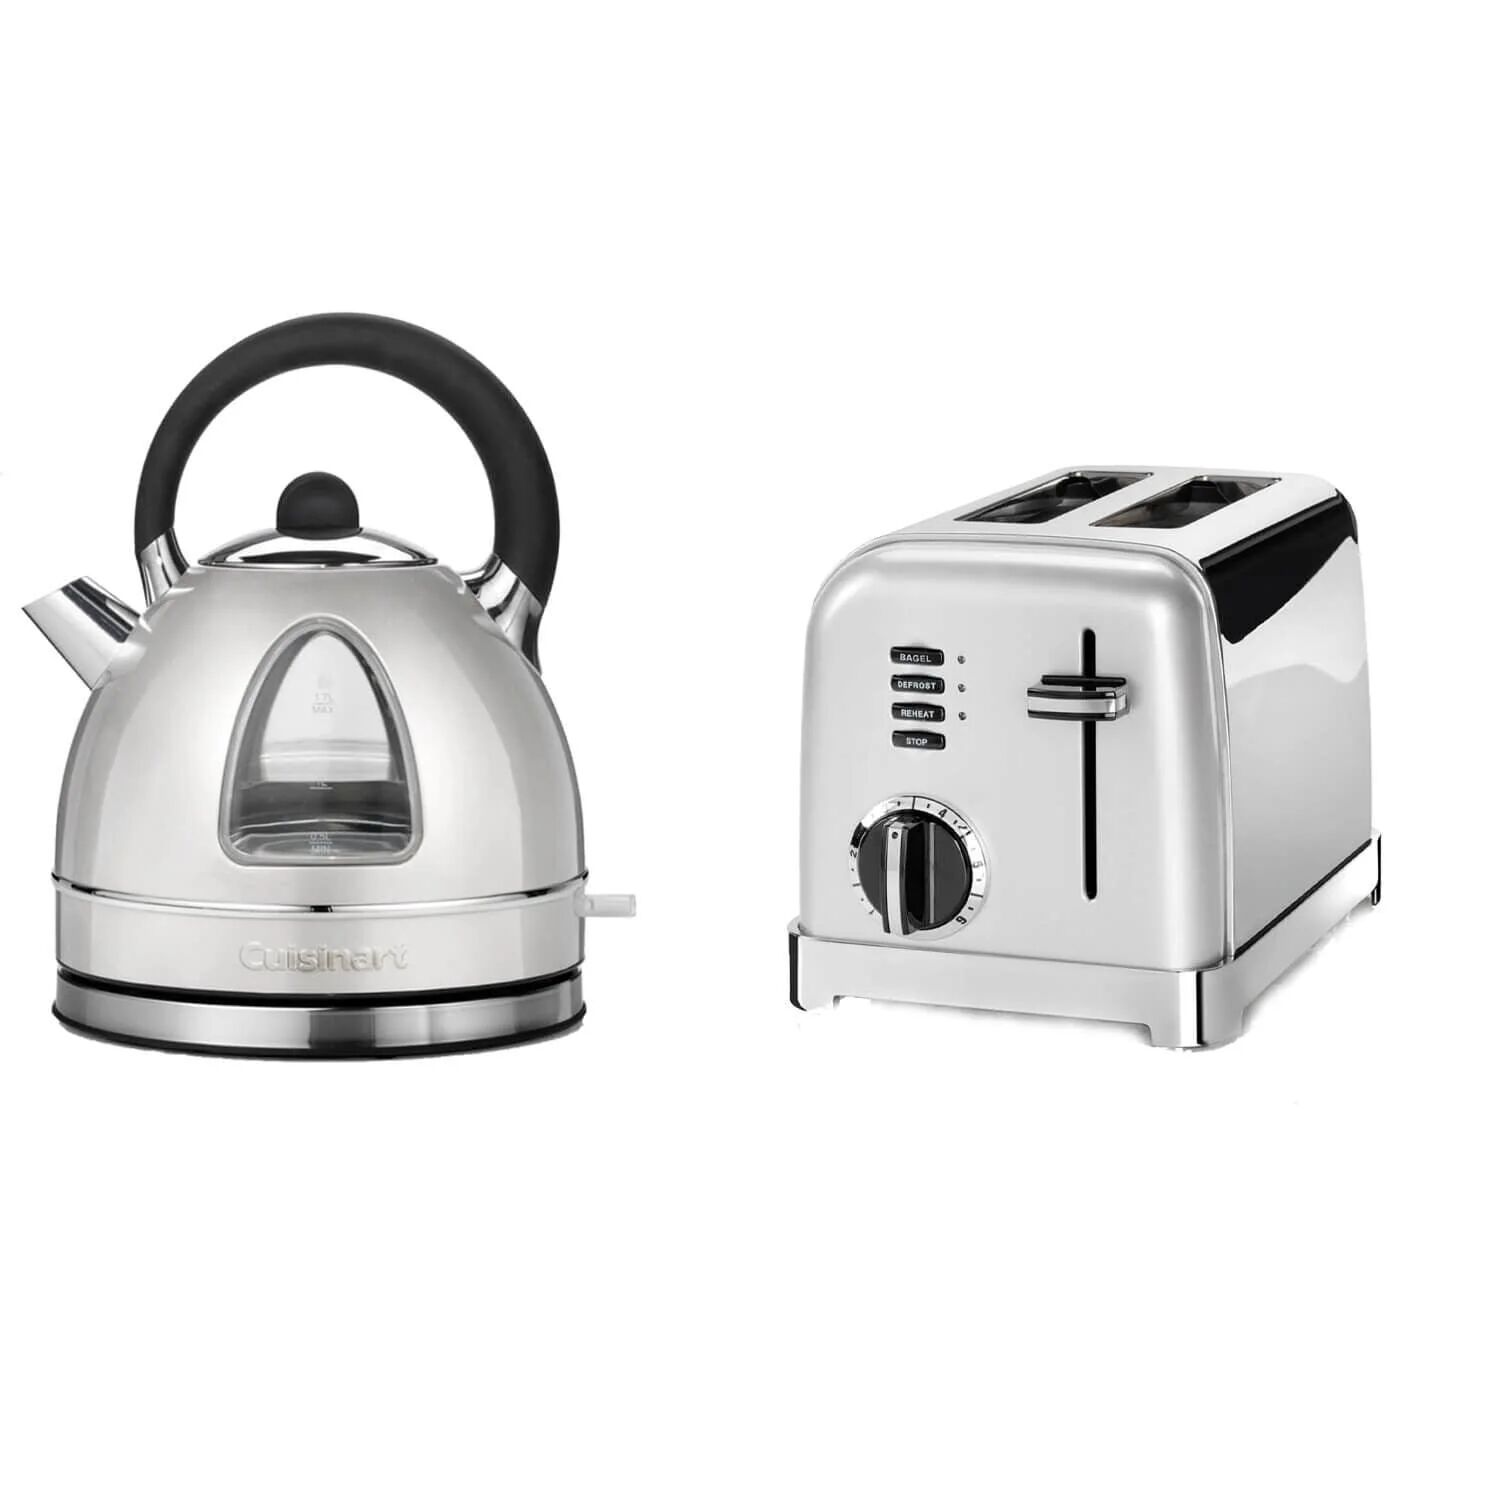 Cuisinart Style Collection Traditional Dome Kettle & 2 Slice Toaster Set - Frosted Pearl